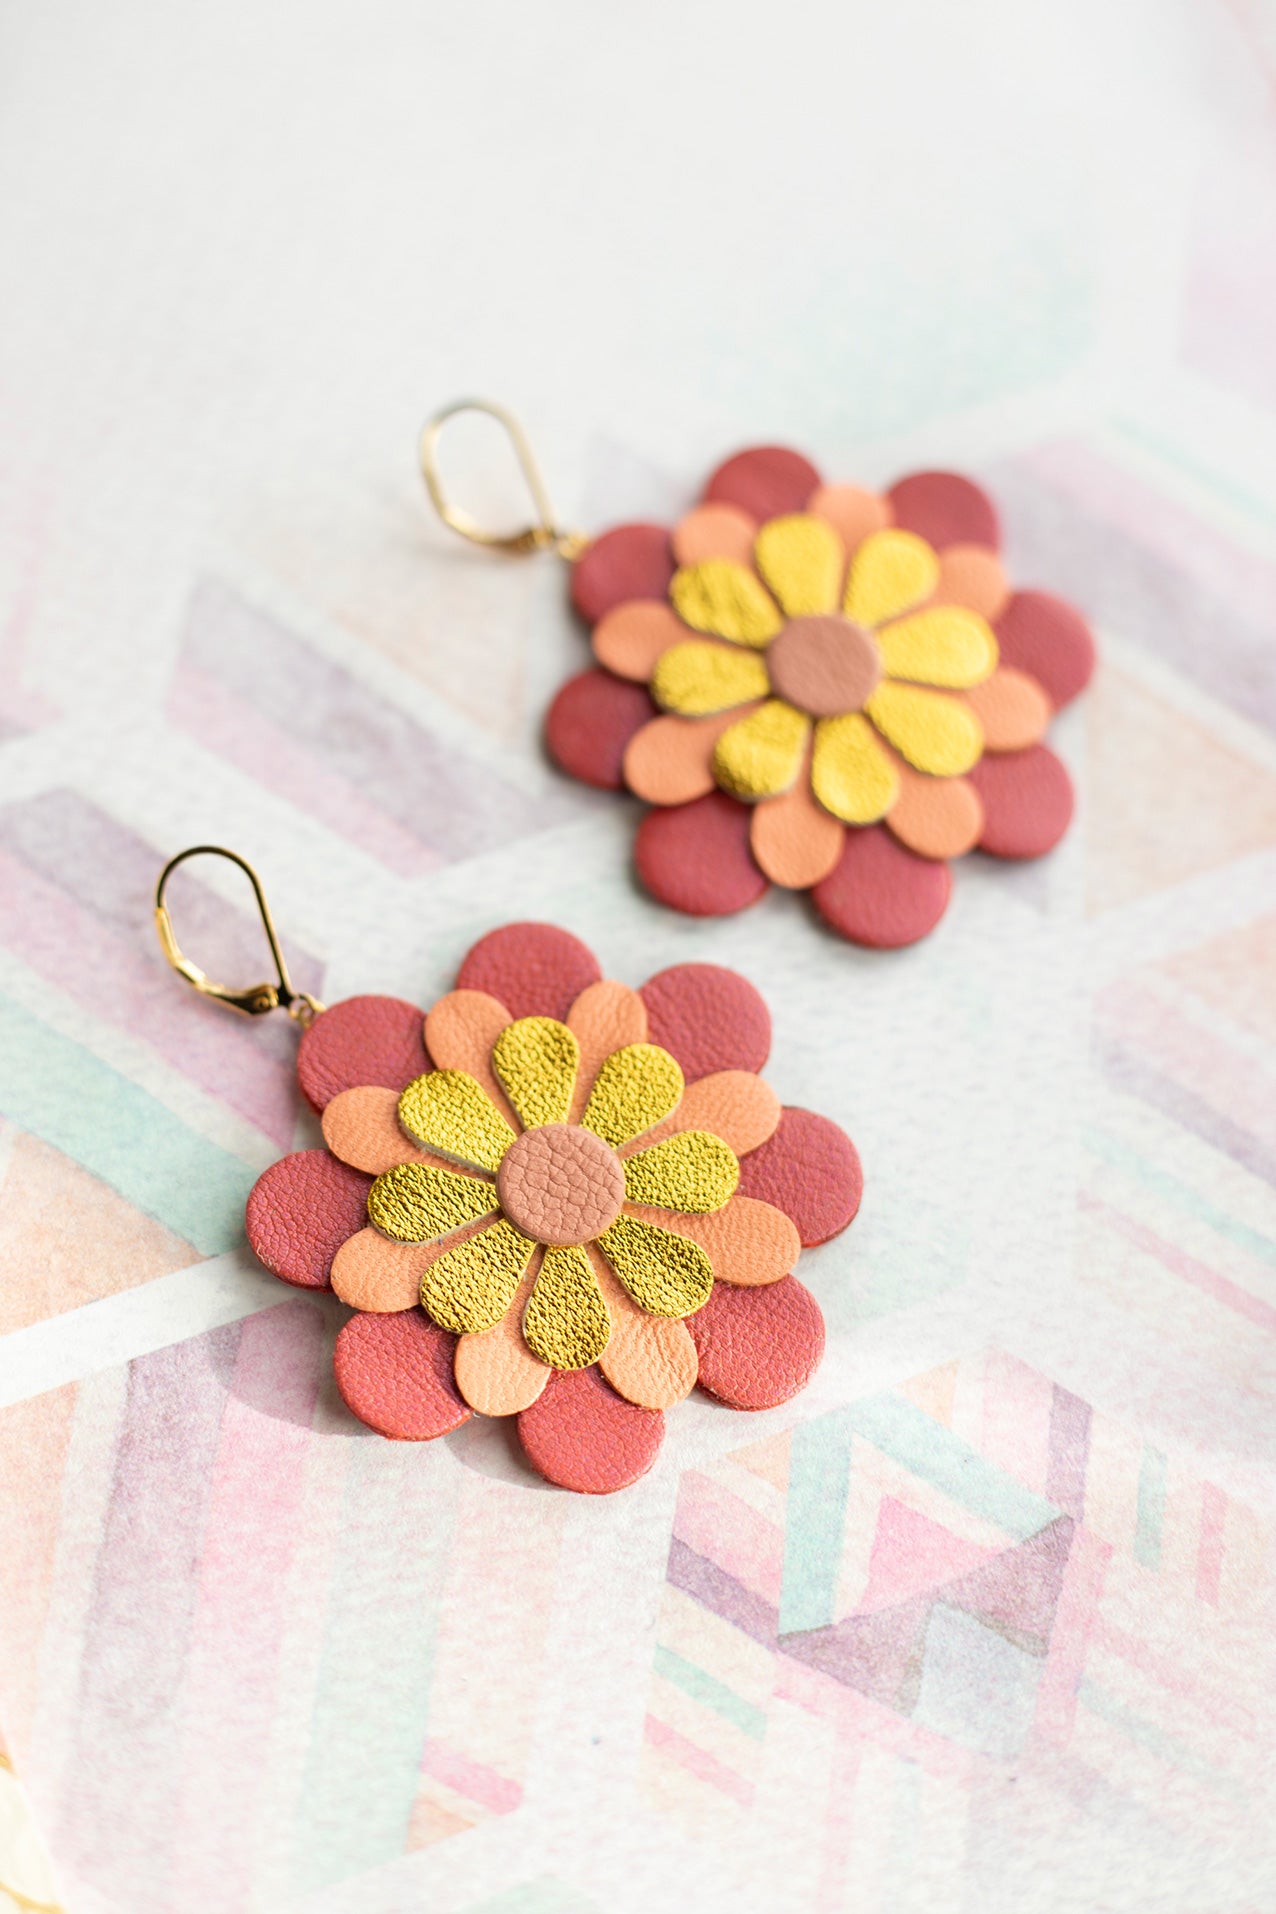 Zinnia flower earrings - gold leather, salmon pink and raspberry